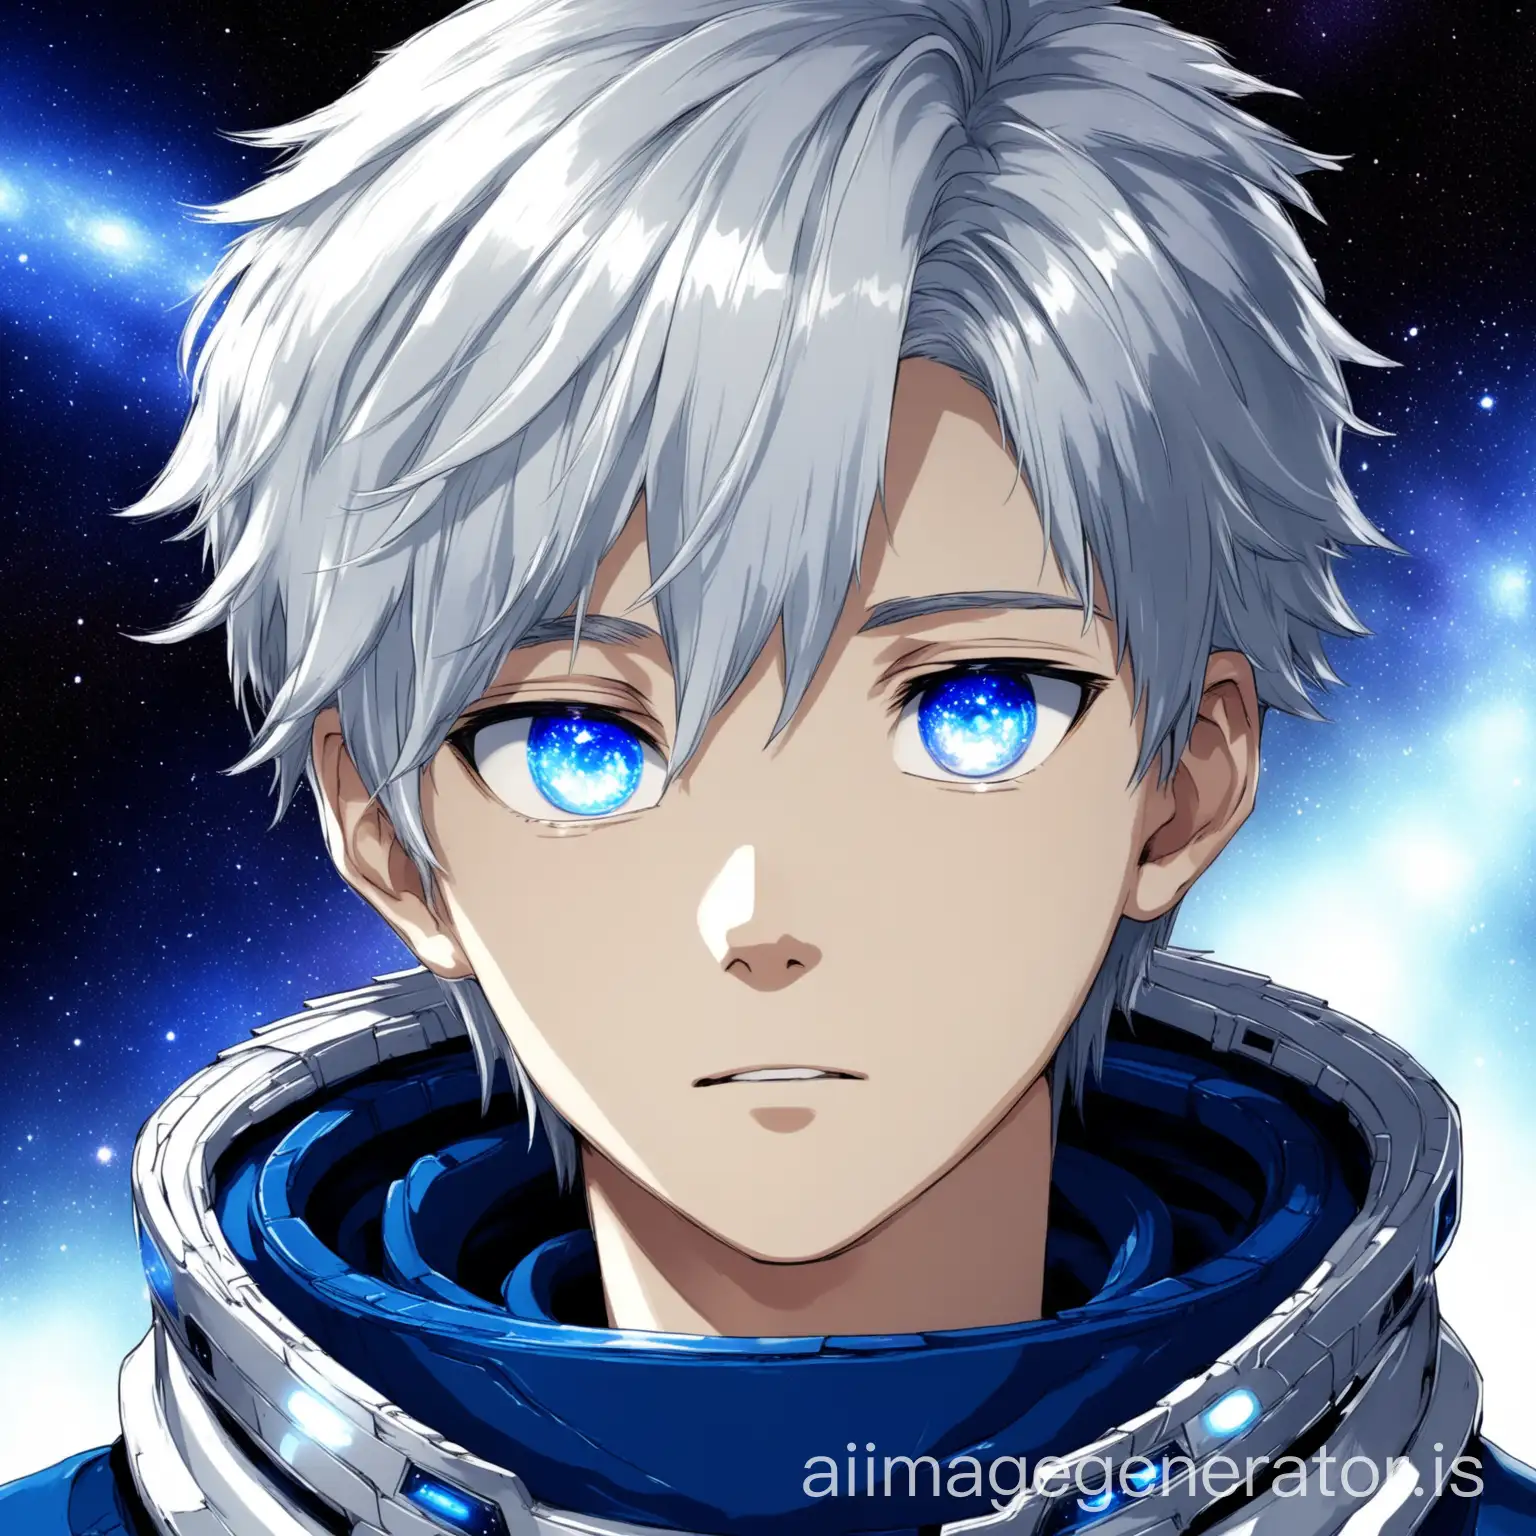 a 16 year old boy with silver hair and white edges and galactic blue eyes